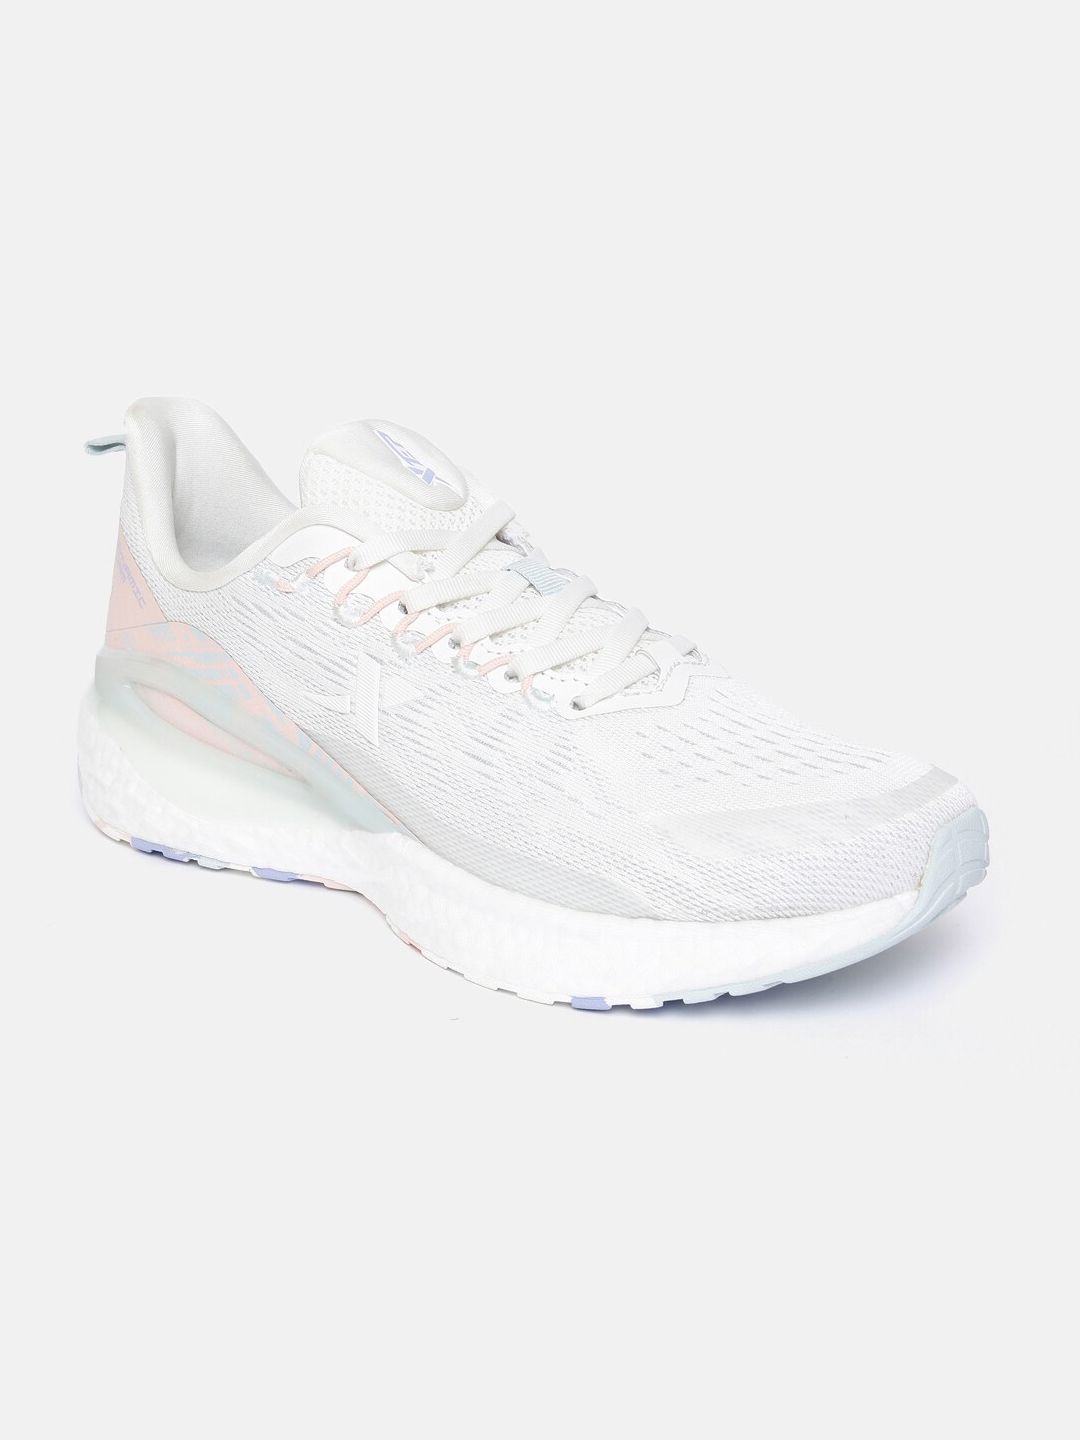 Xtep Women Off White Textile Running Non-Marking Shoes Price in India